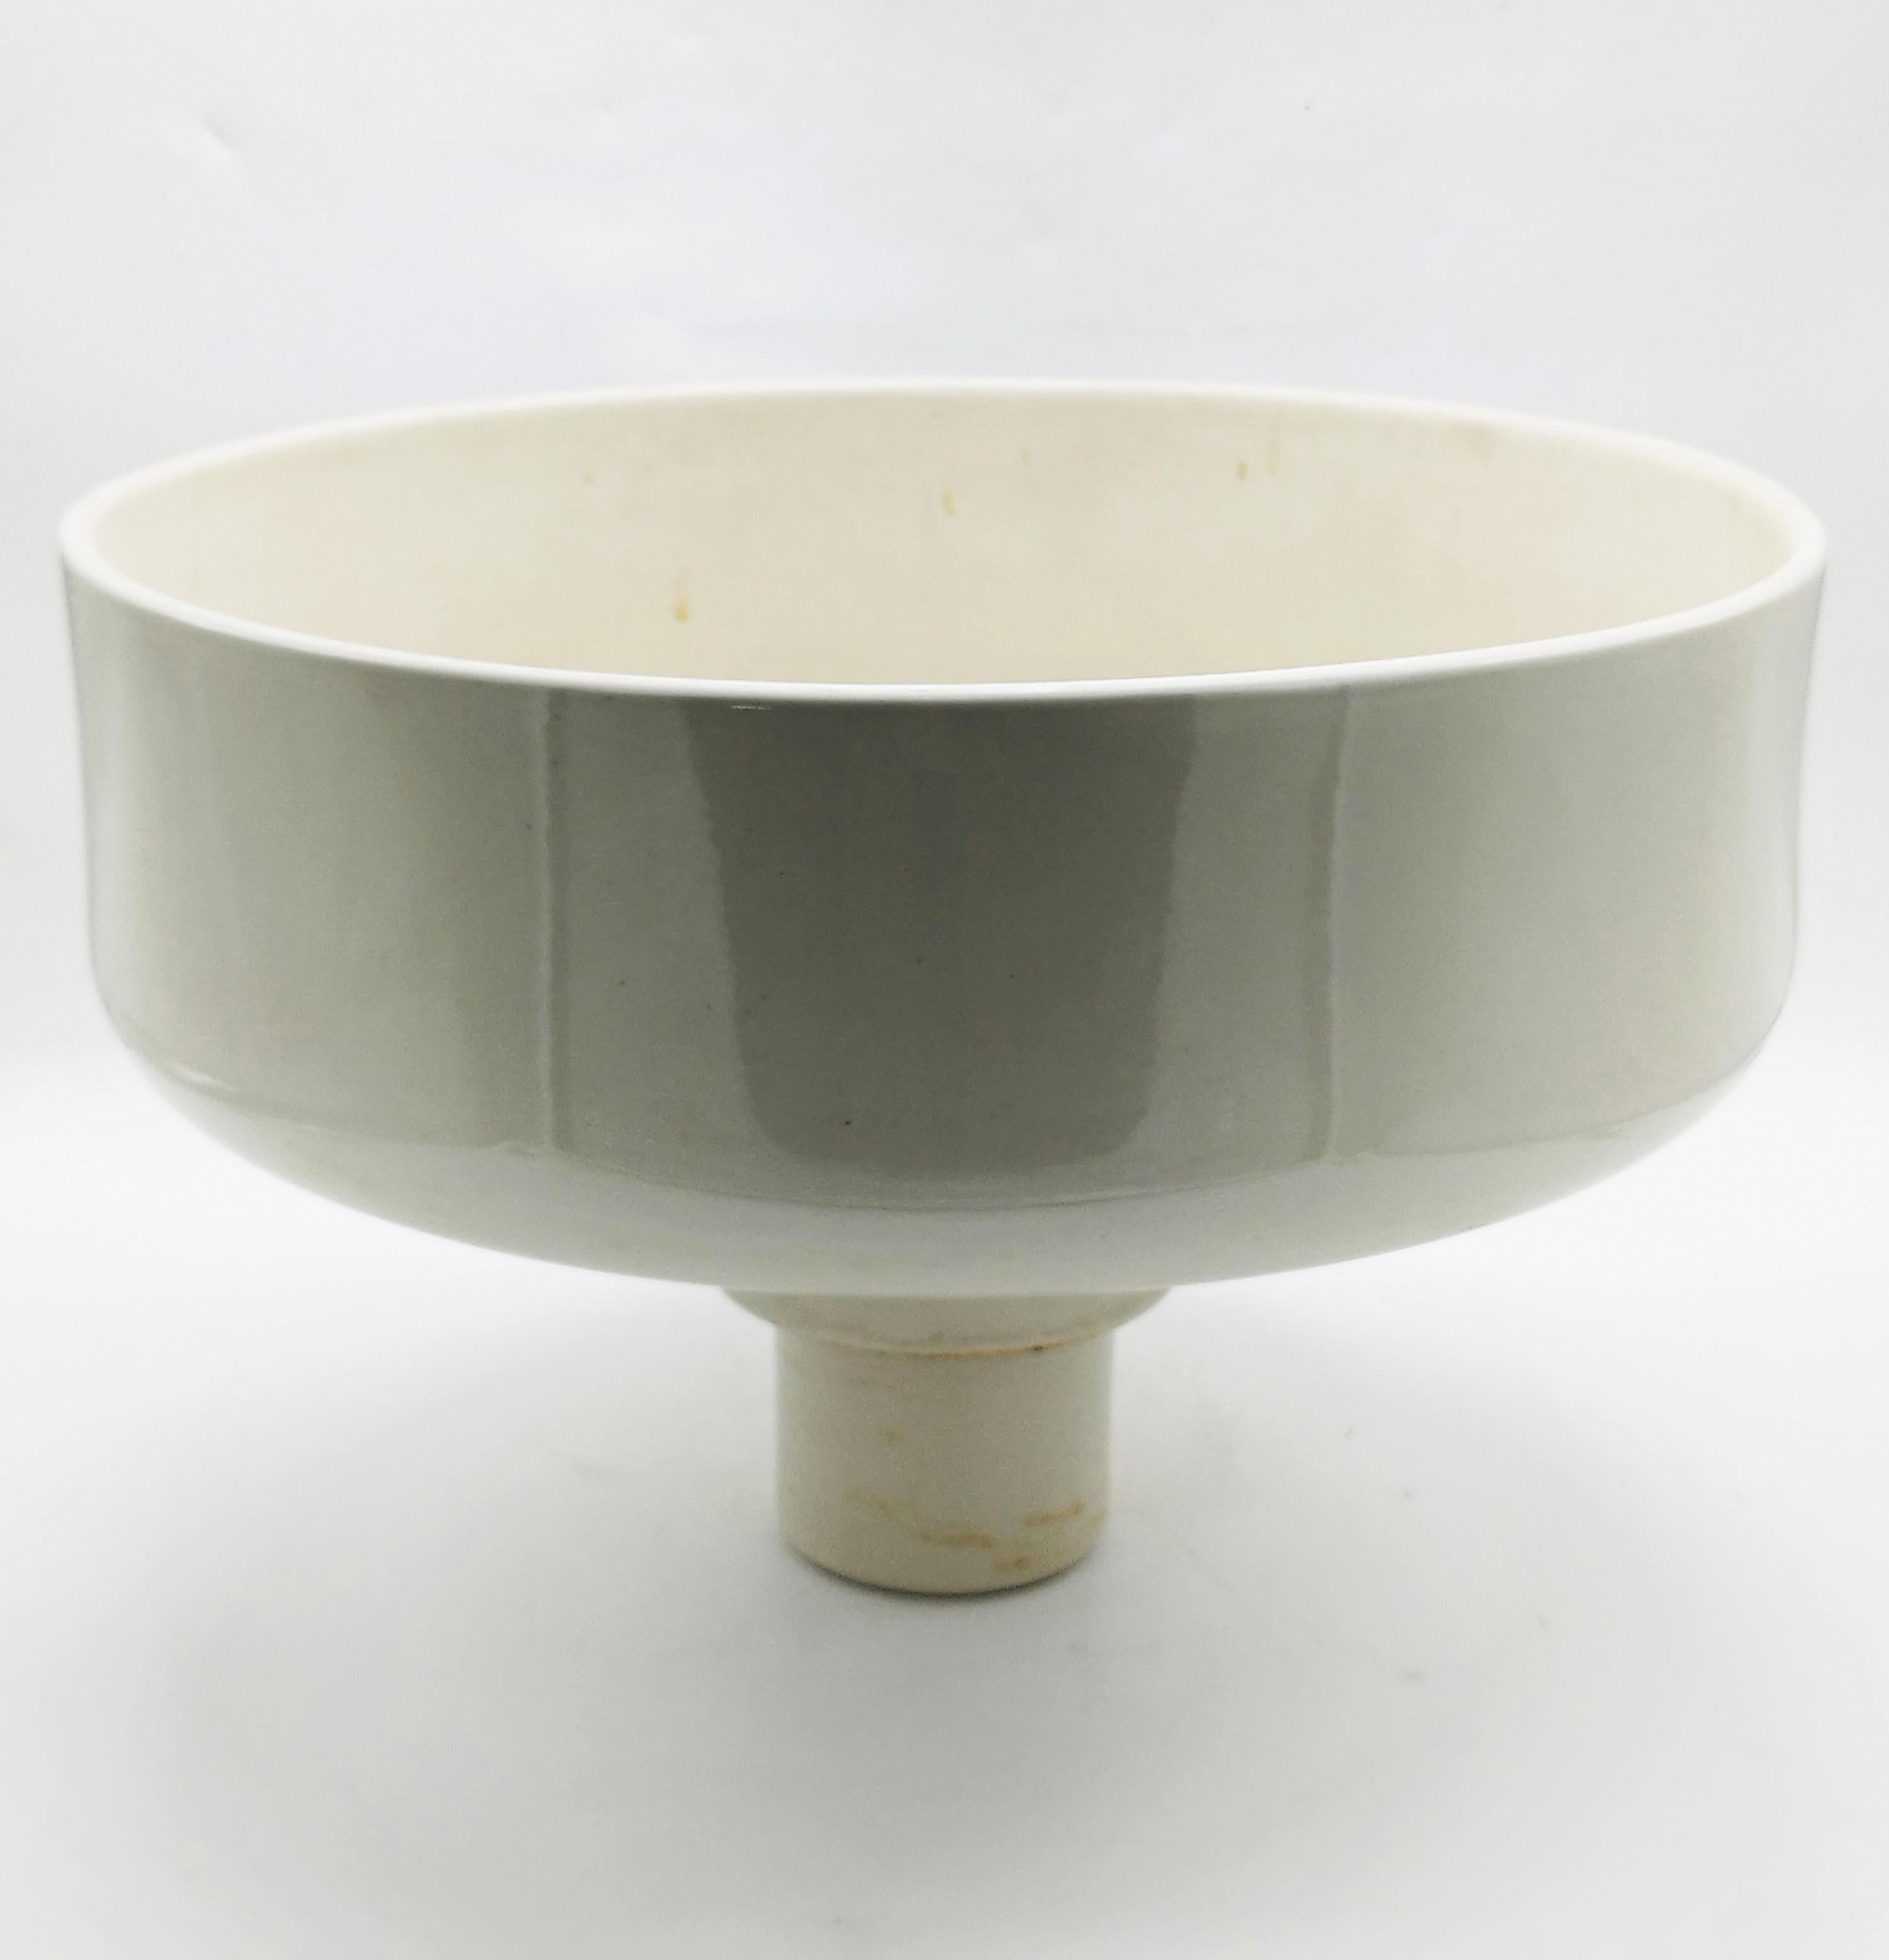 Angelo Mangiarotti for F.lli Brambilla Porcelain Floor Planter, Italy, 1960s In Good Condition For Sale In Naples, IT